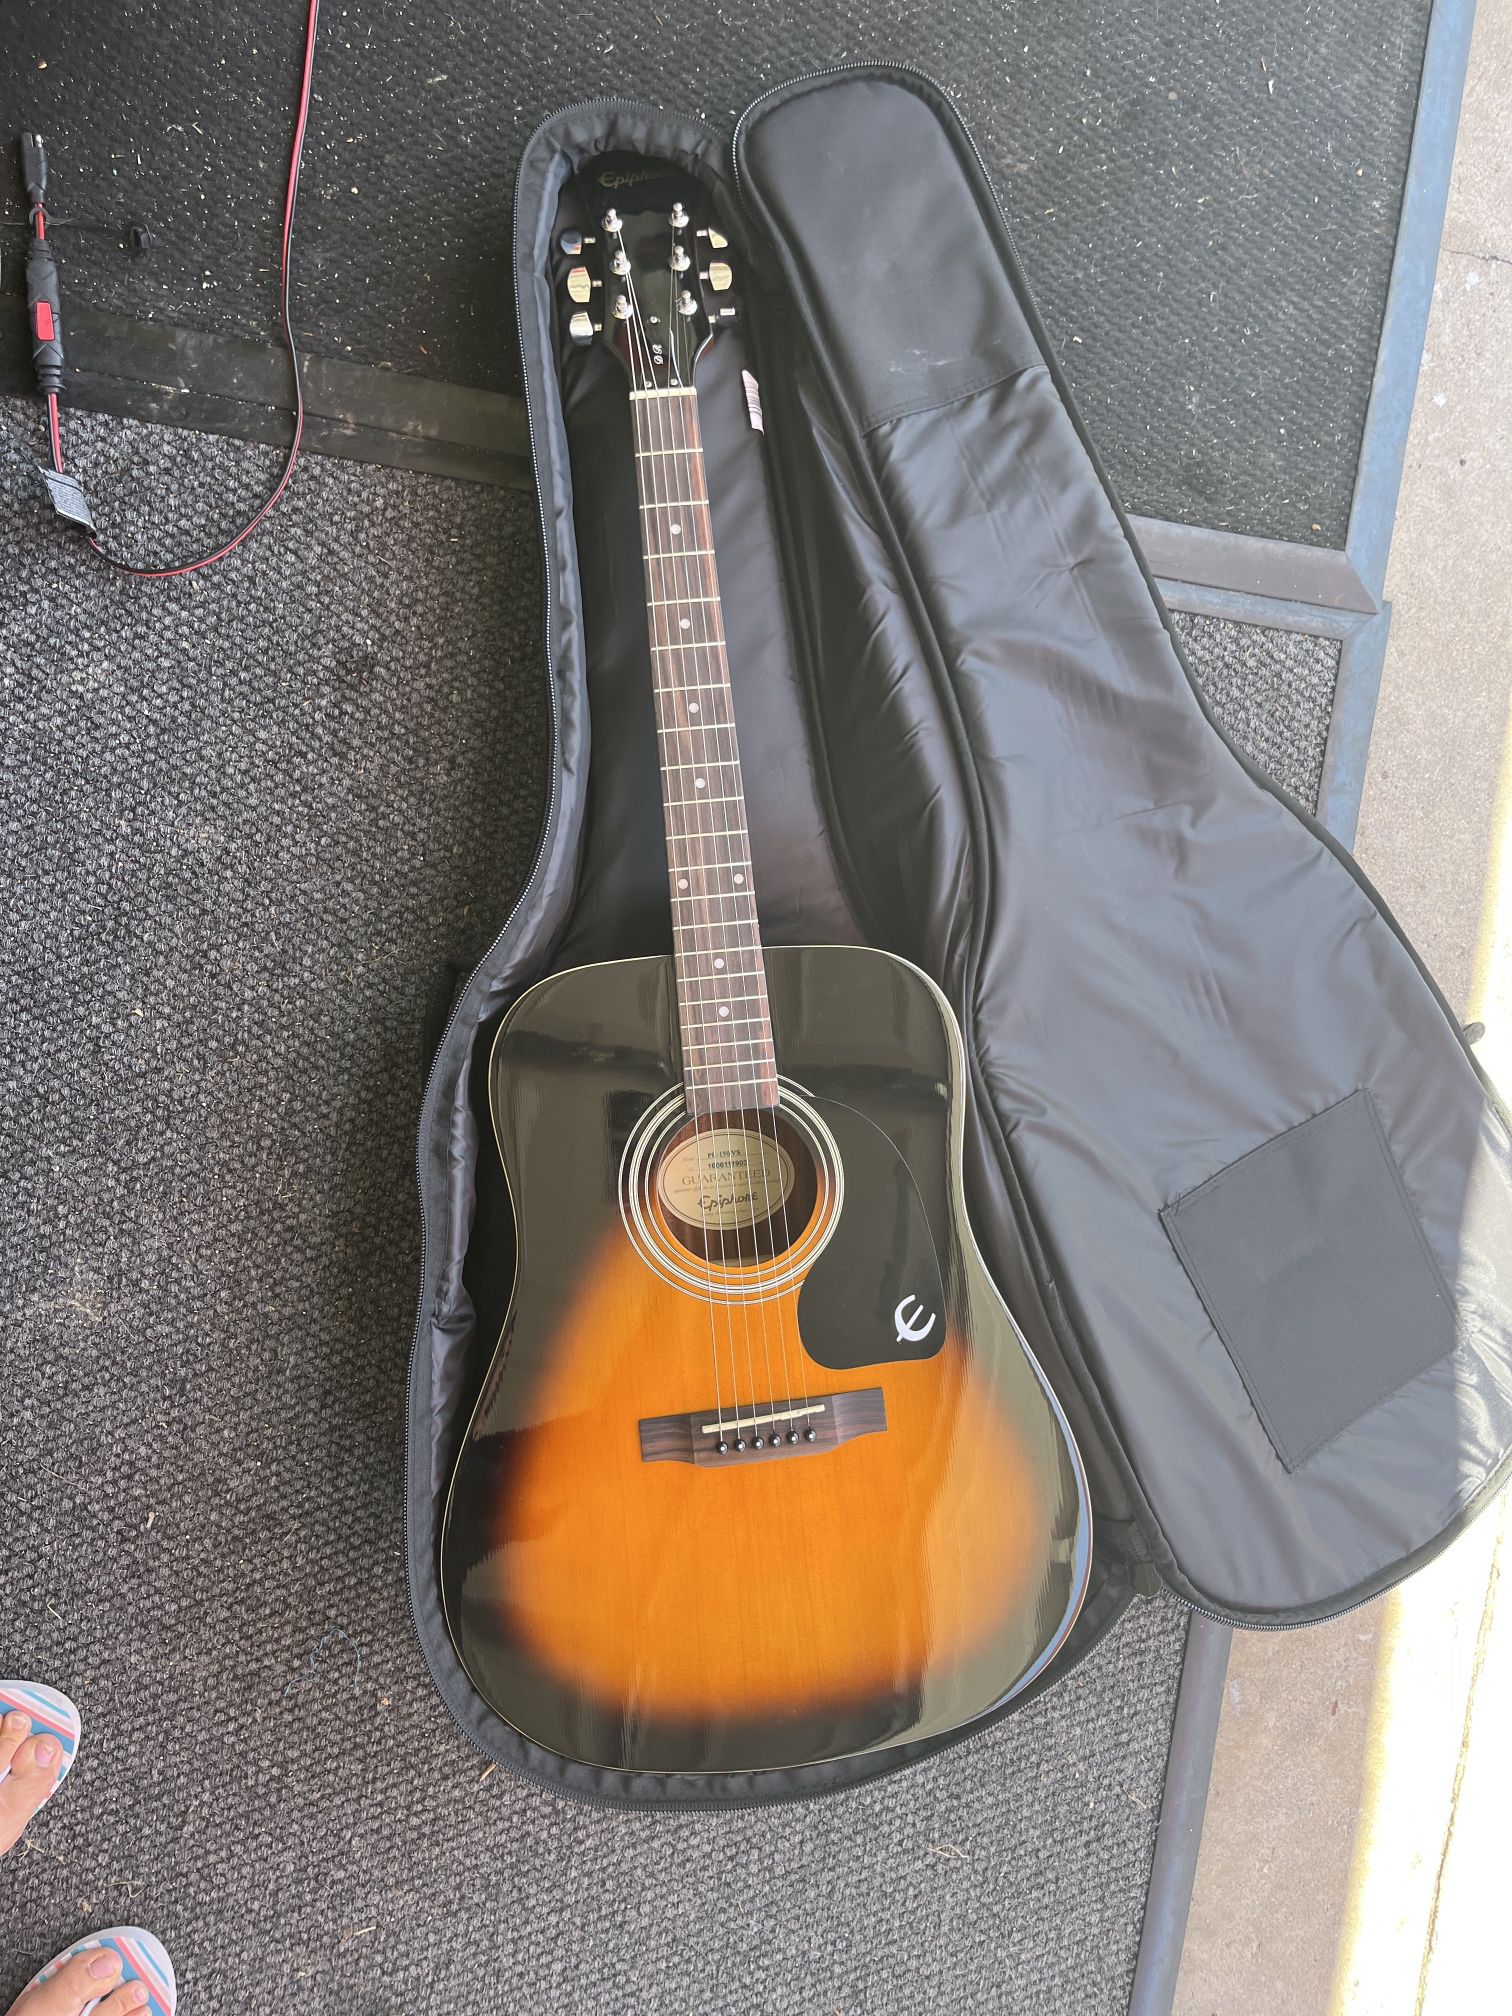 Epiphone Acoustic Guitar With Bag And Picks